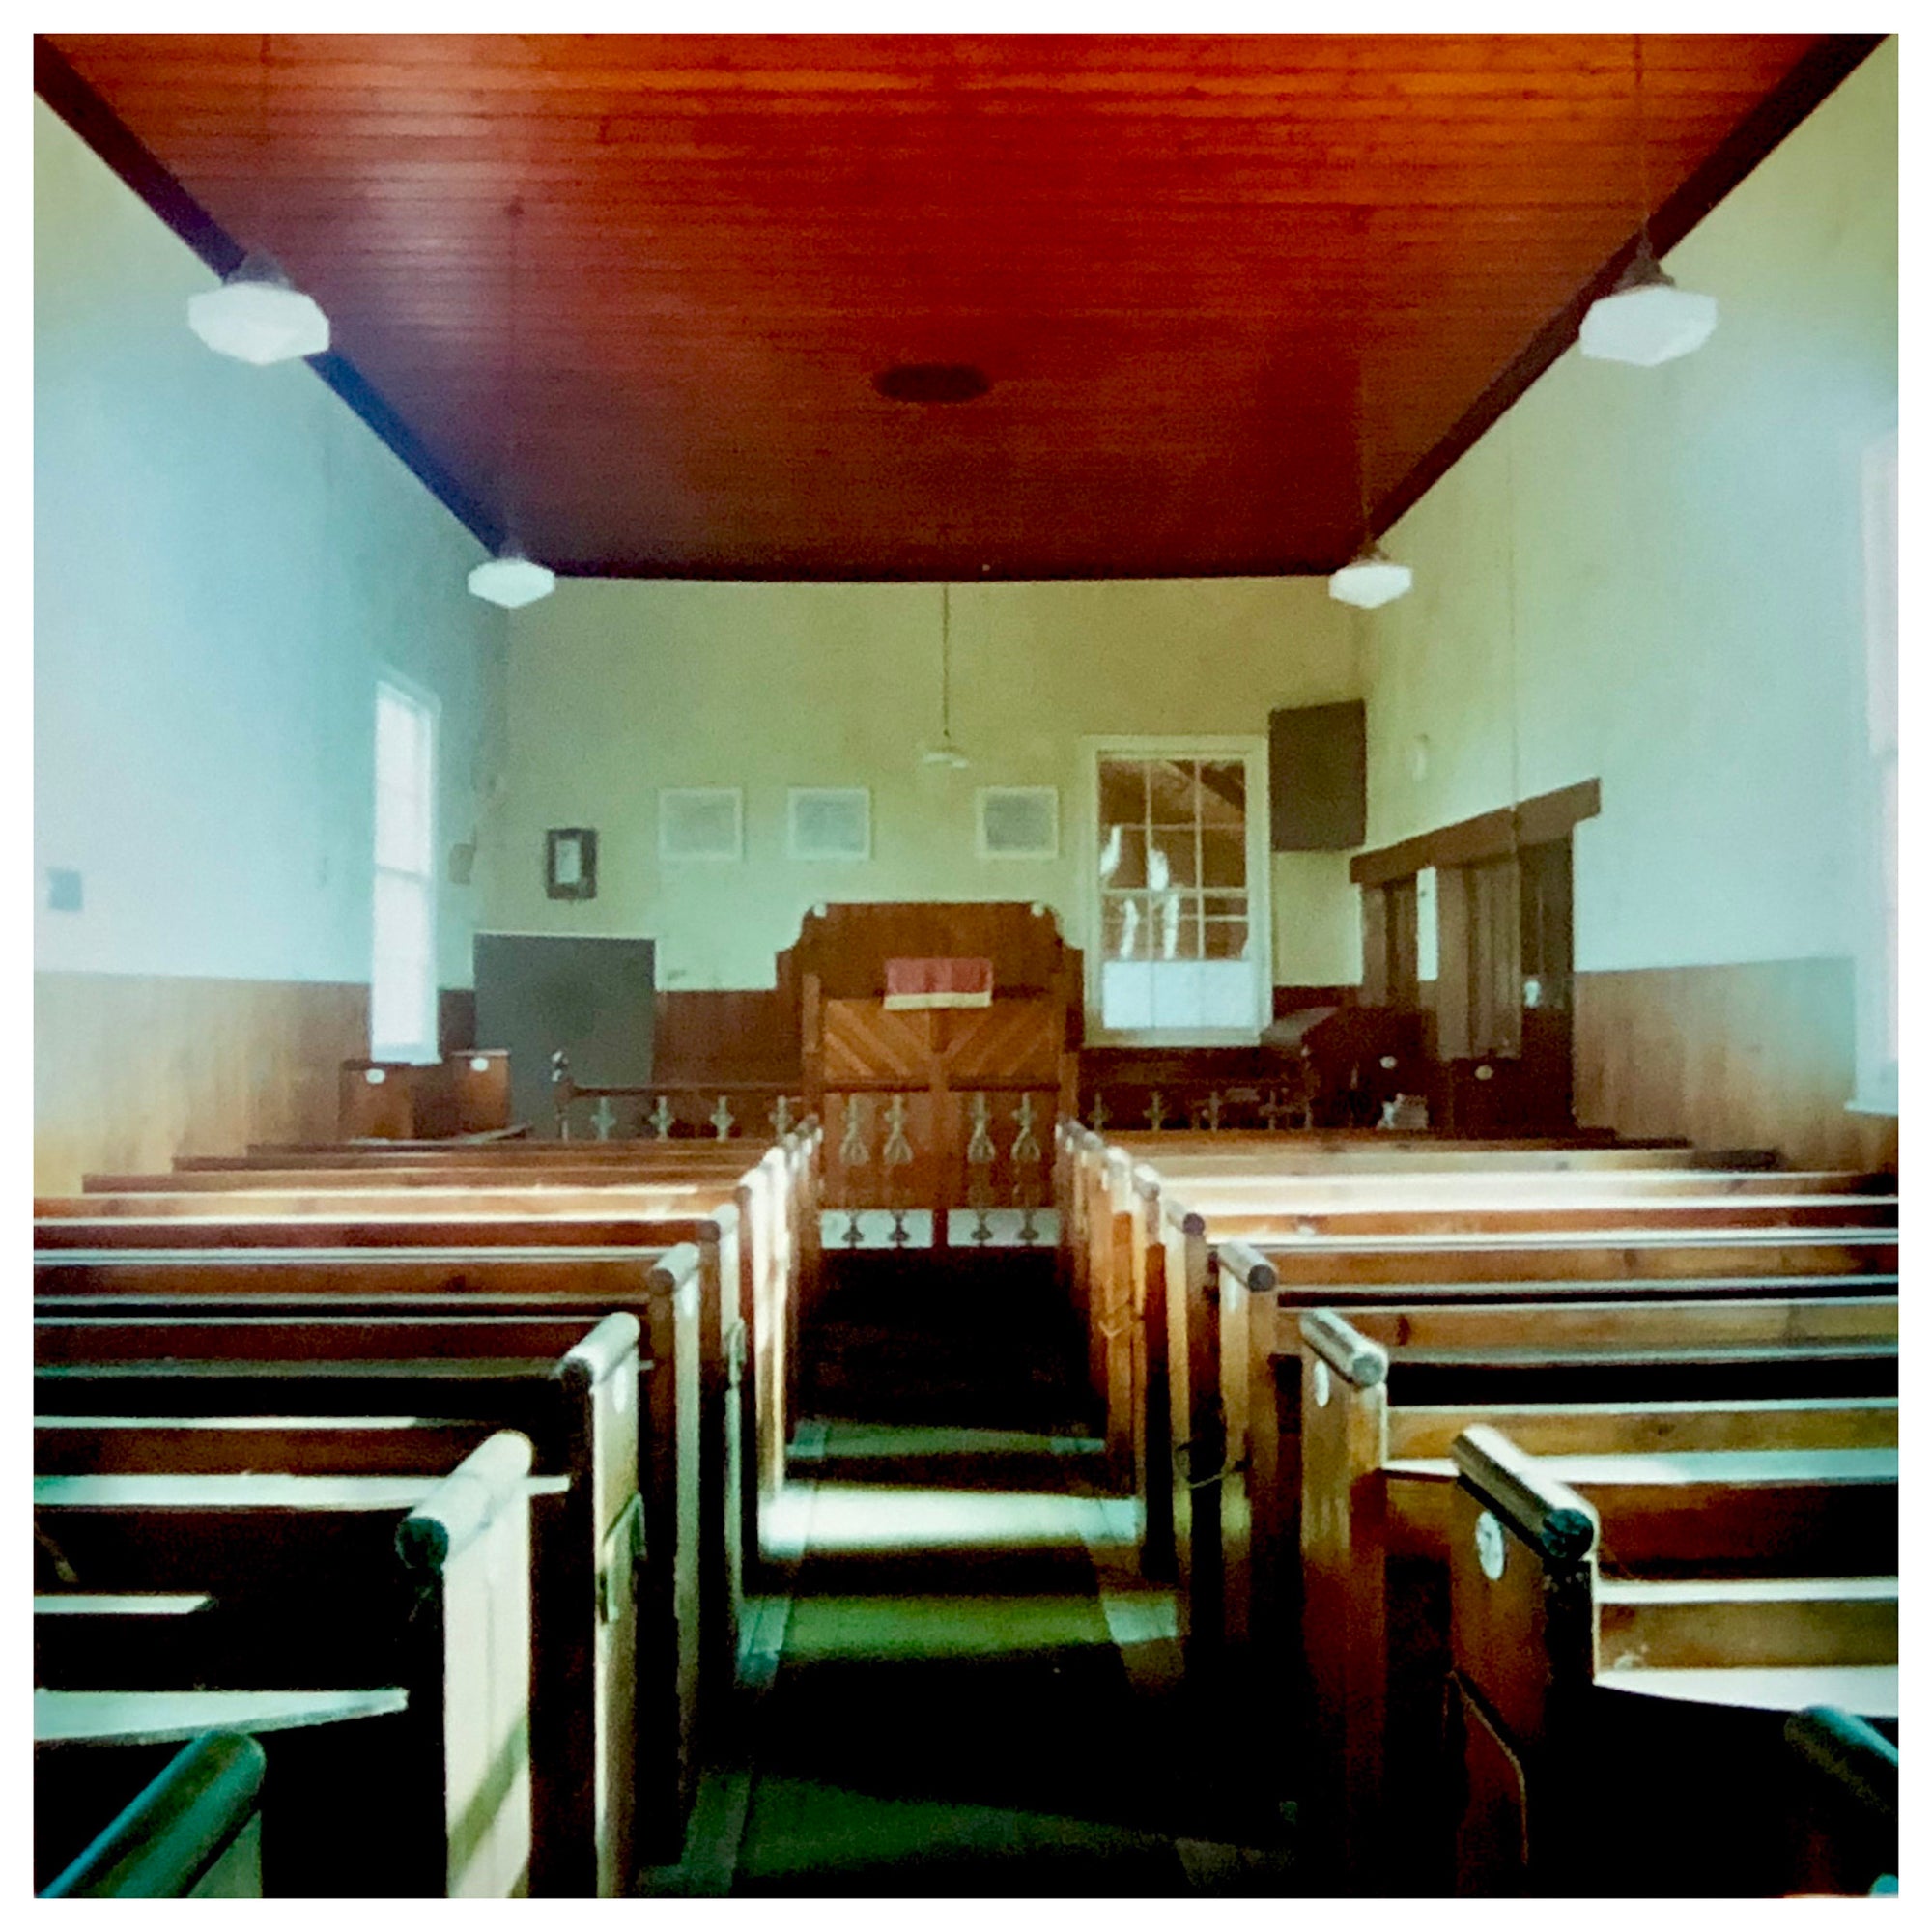 View from the Pulpit - Baptist Chapel, Chittering, Cambridgeshire, 1987